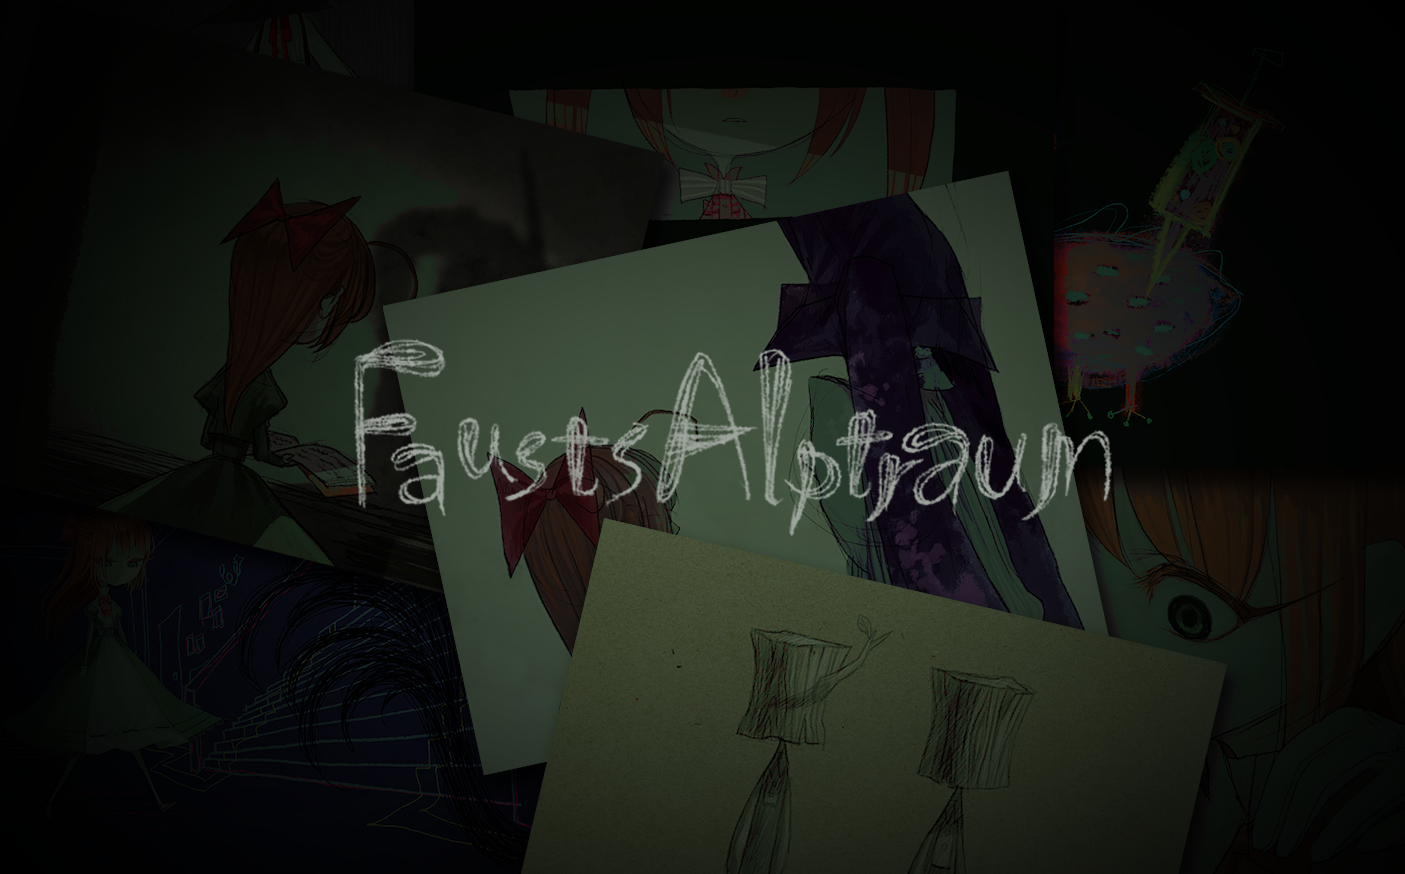 fausts alptraum game help